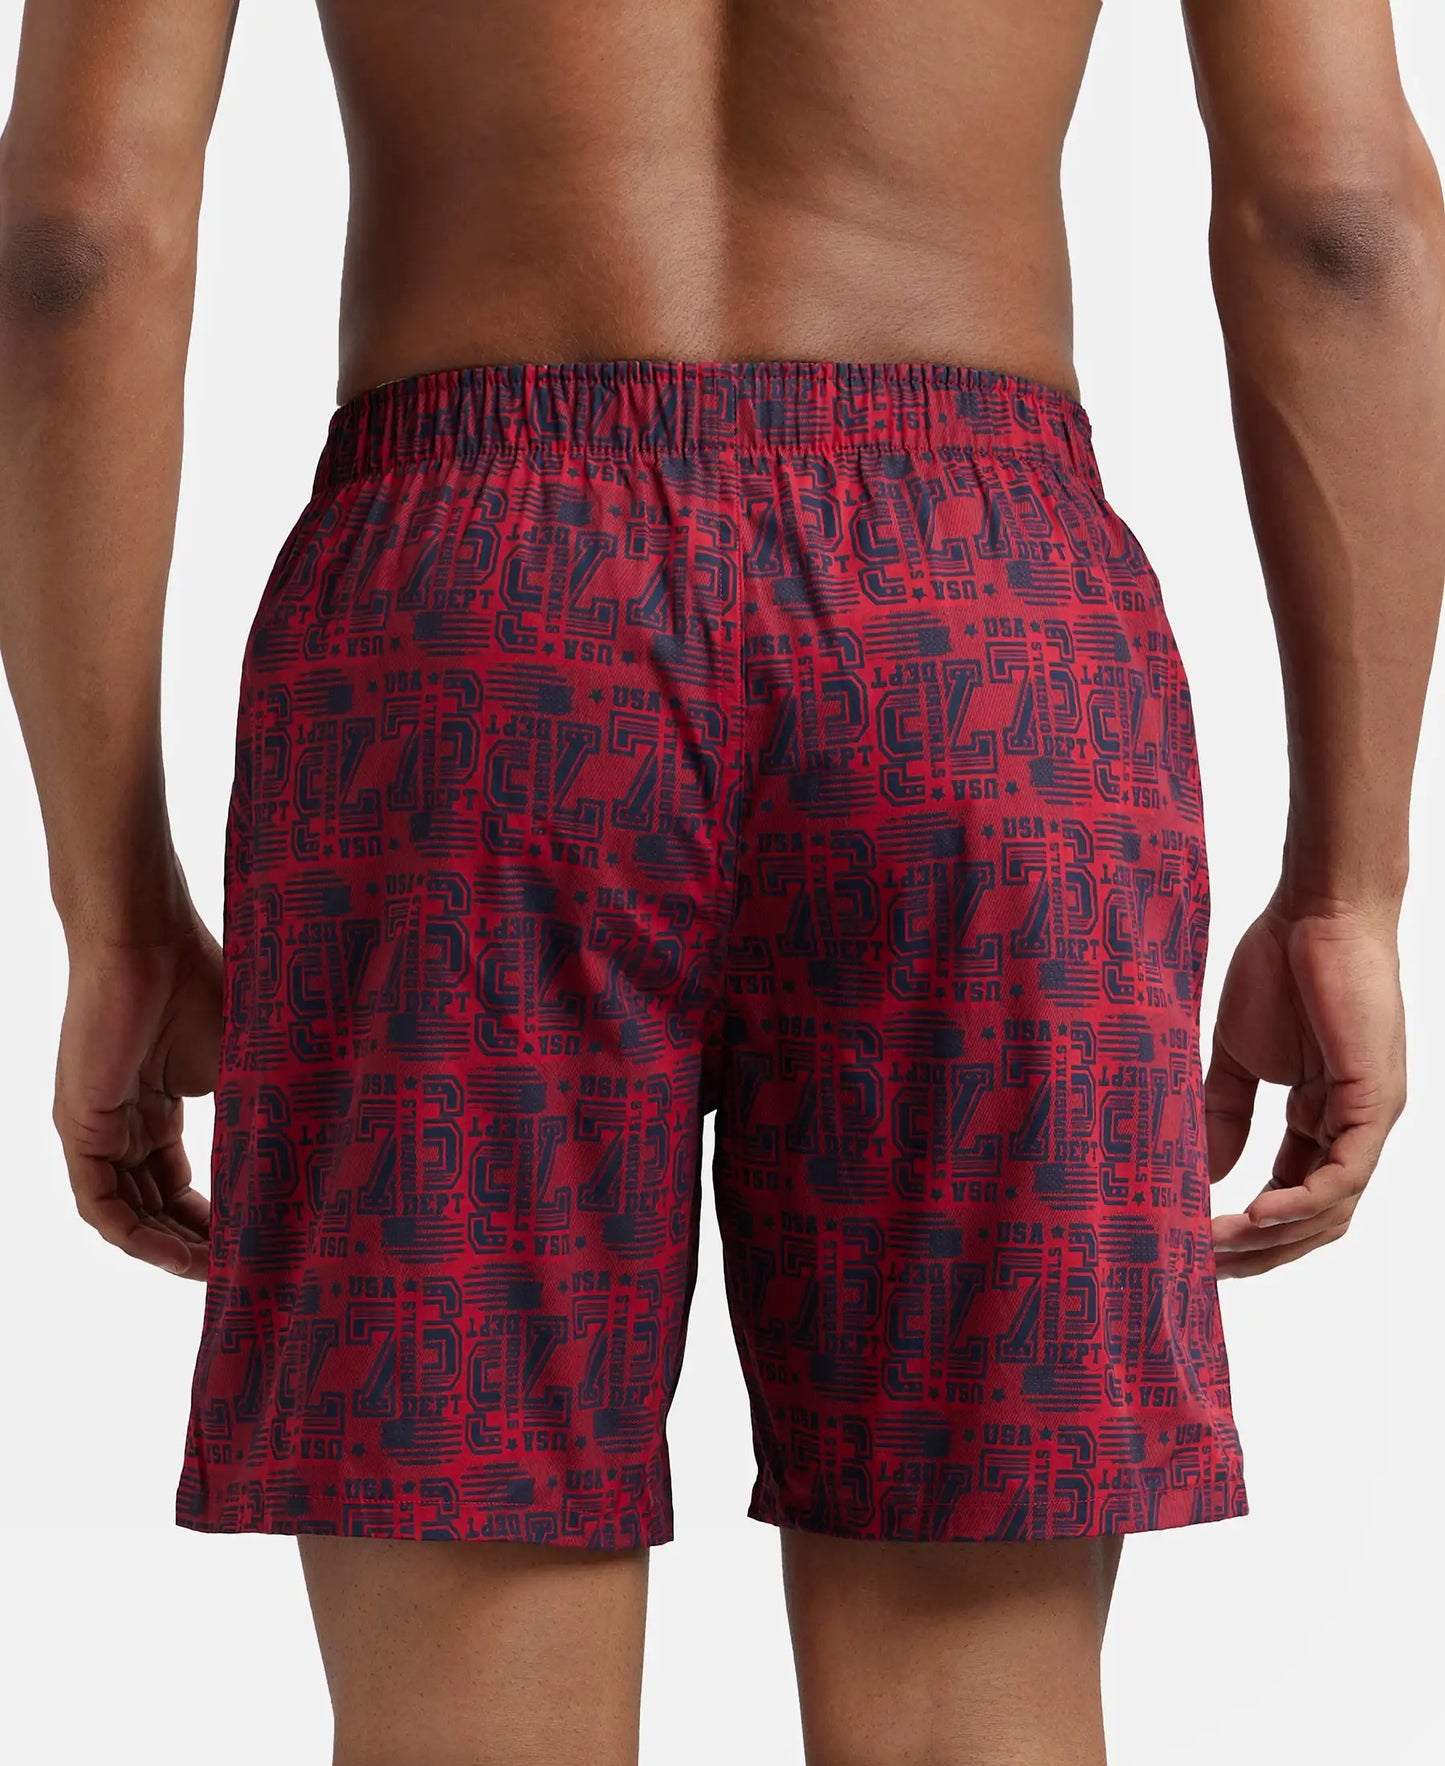 Super Combed Mercerized Cotton Woven Printed Boxer Shorts with Side Pocket - Navy Brick Red-6